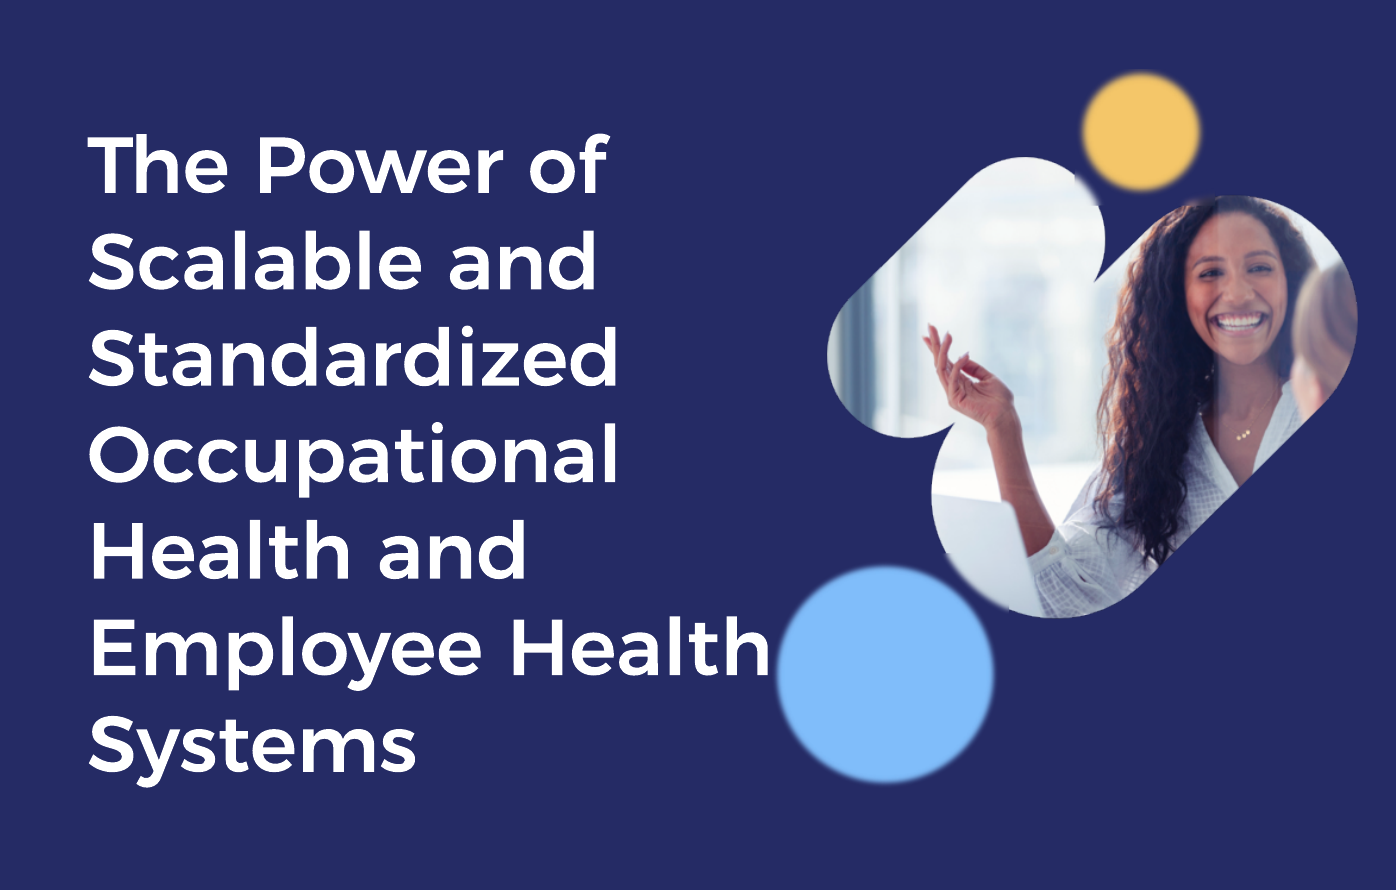 The Power of Scalable and Standardized Occupational Health and Employee Health Systems